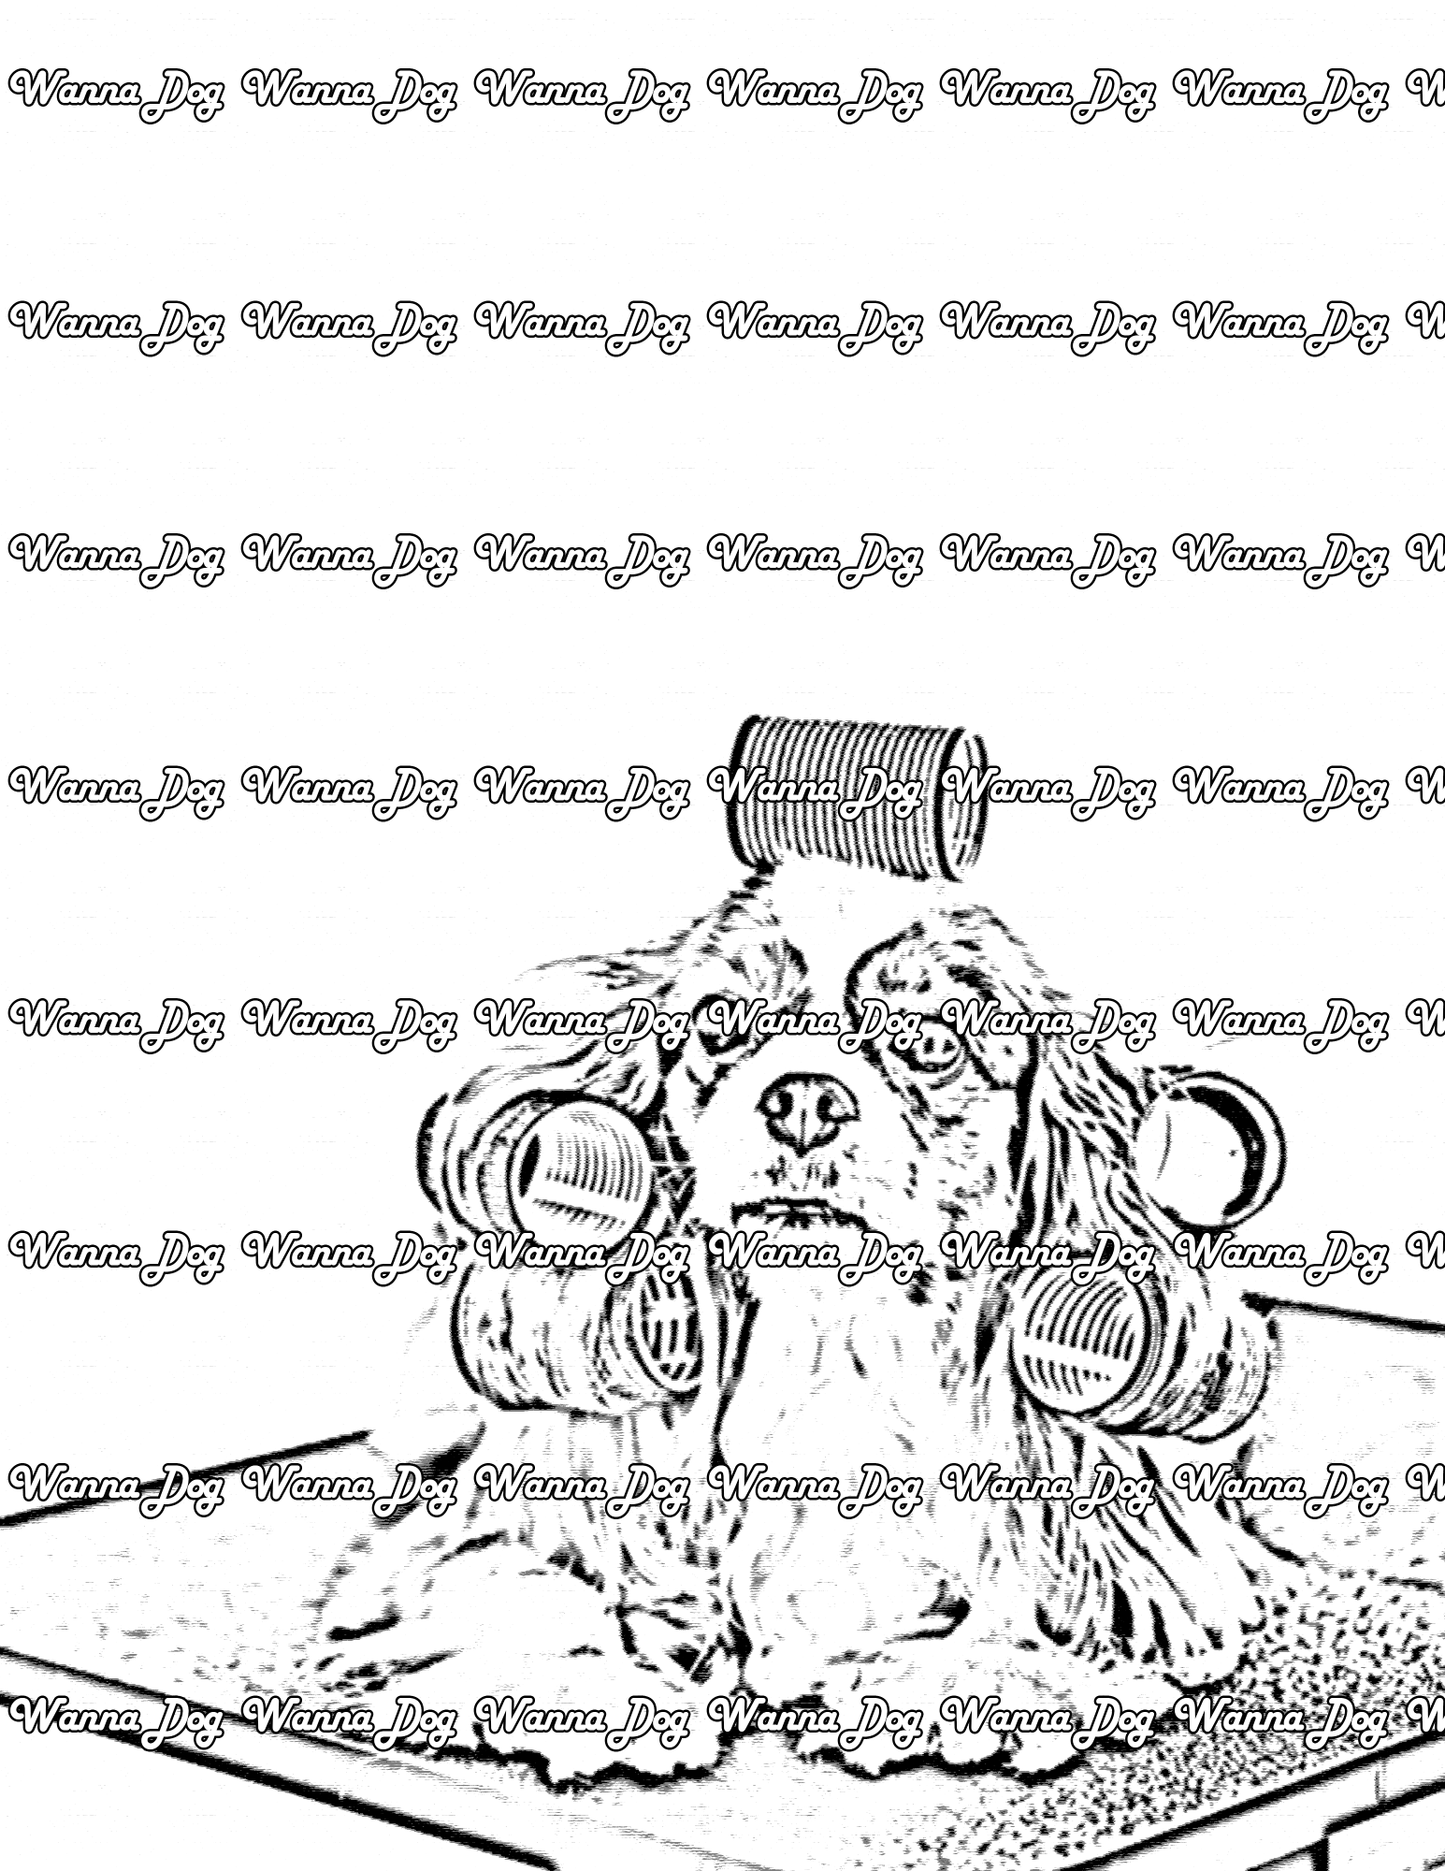 Cavalier King Charles Spaniel Coloring Page of a Cavalier King Charles Spaniel on a spa day